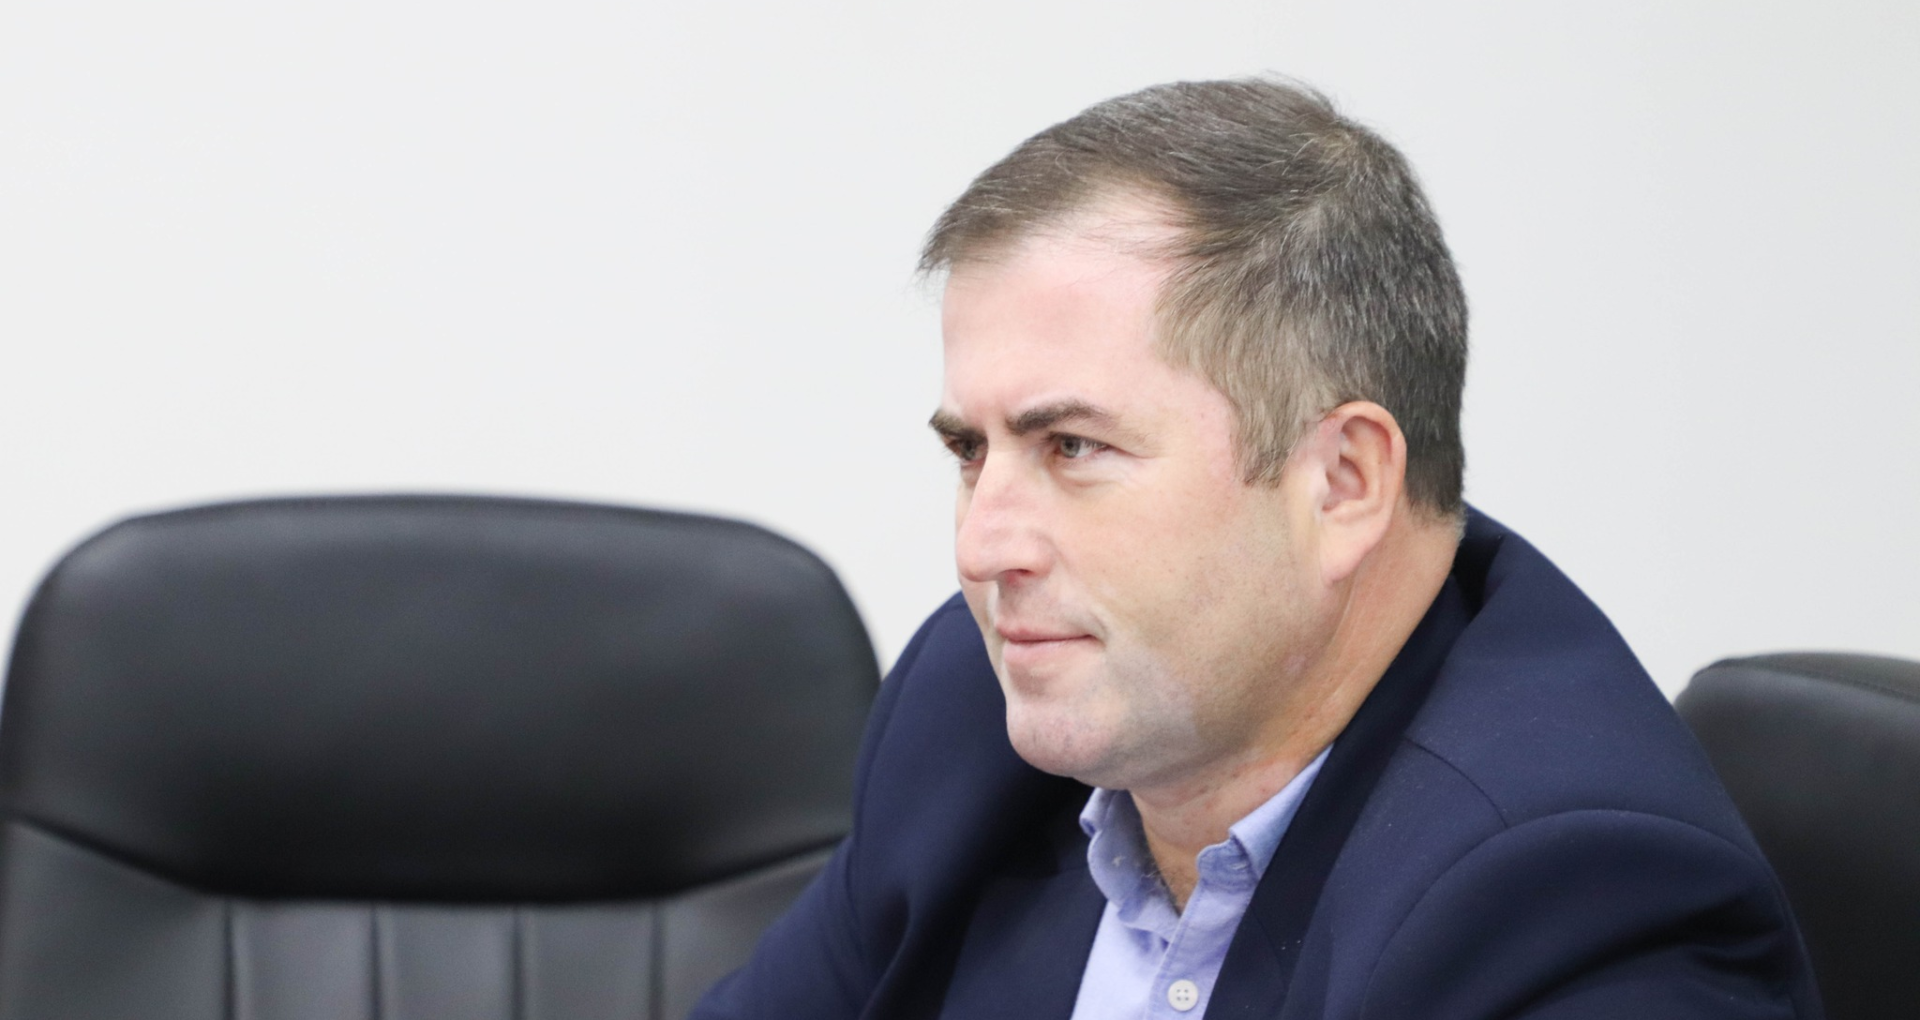 Final decision for Corșicova: Supreme Court of Justice declared inadmissible the appeal filed by Shor’s candidate in Balti, excluded from the race after the first round of elections